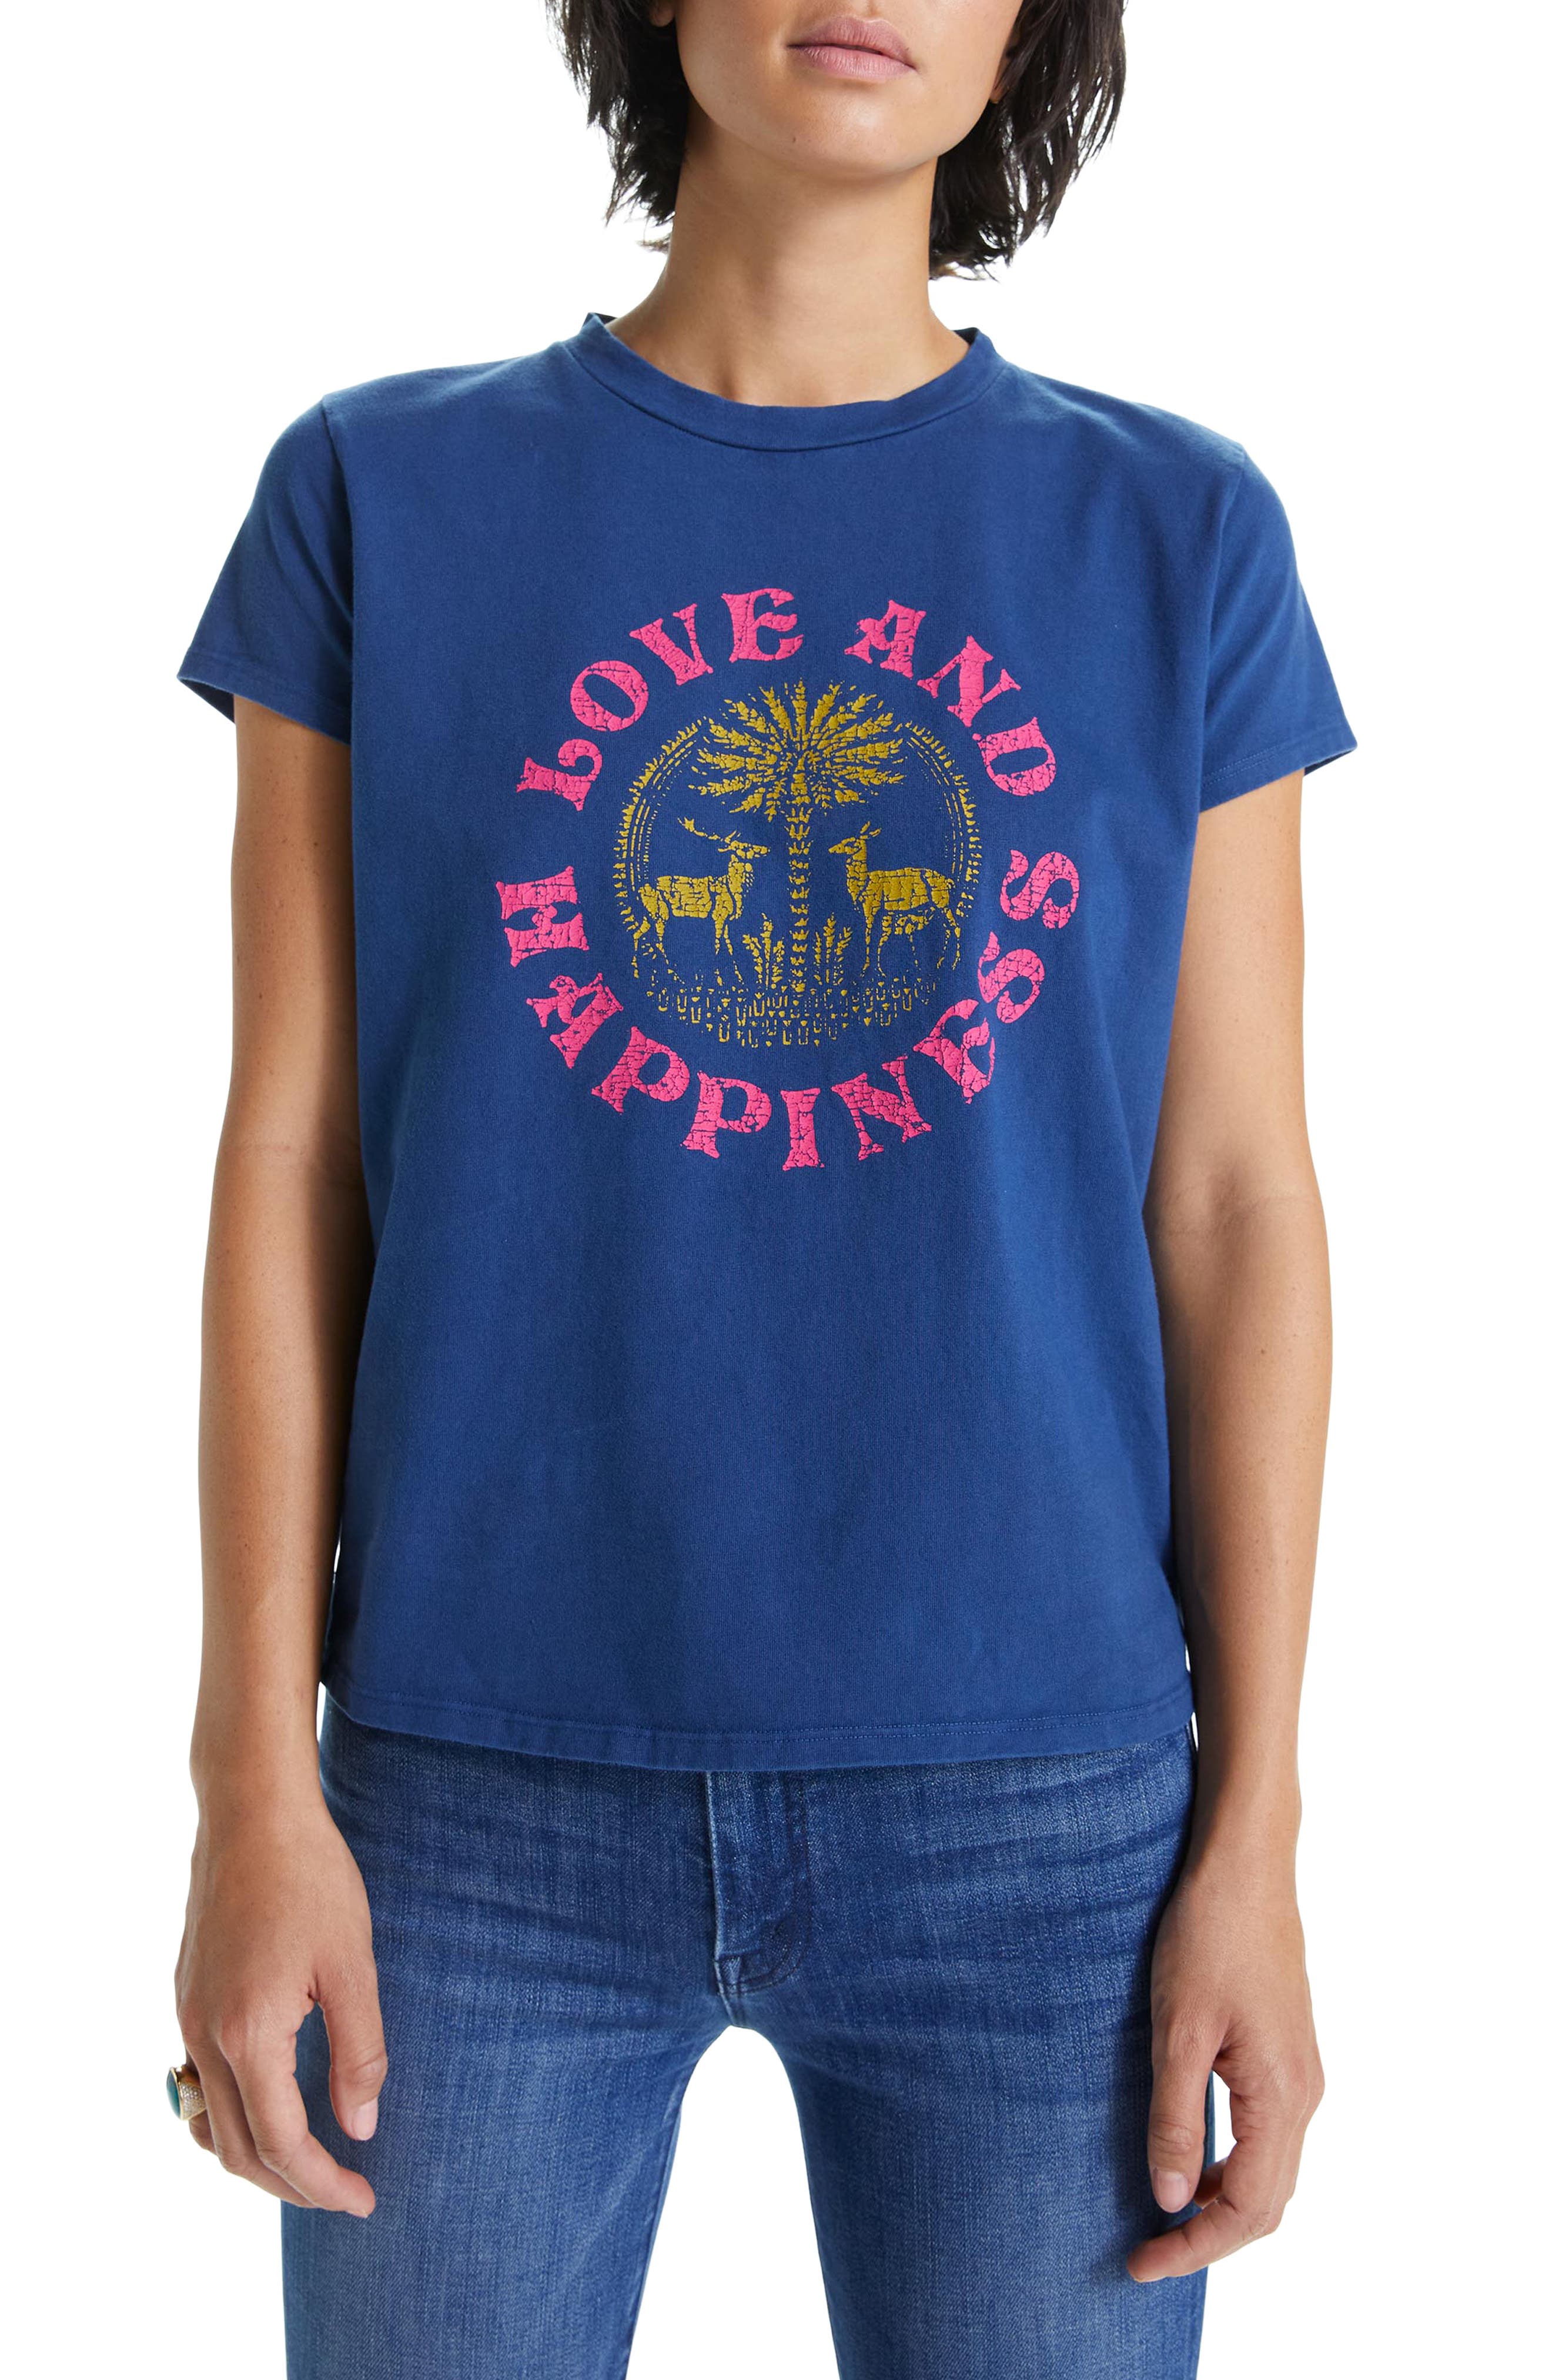 MOTHER THE BOXY GOODIE GOODIE LOVE & HAPPINESS GRAPHIC TEE,192411258641